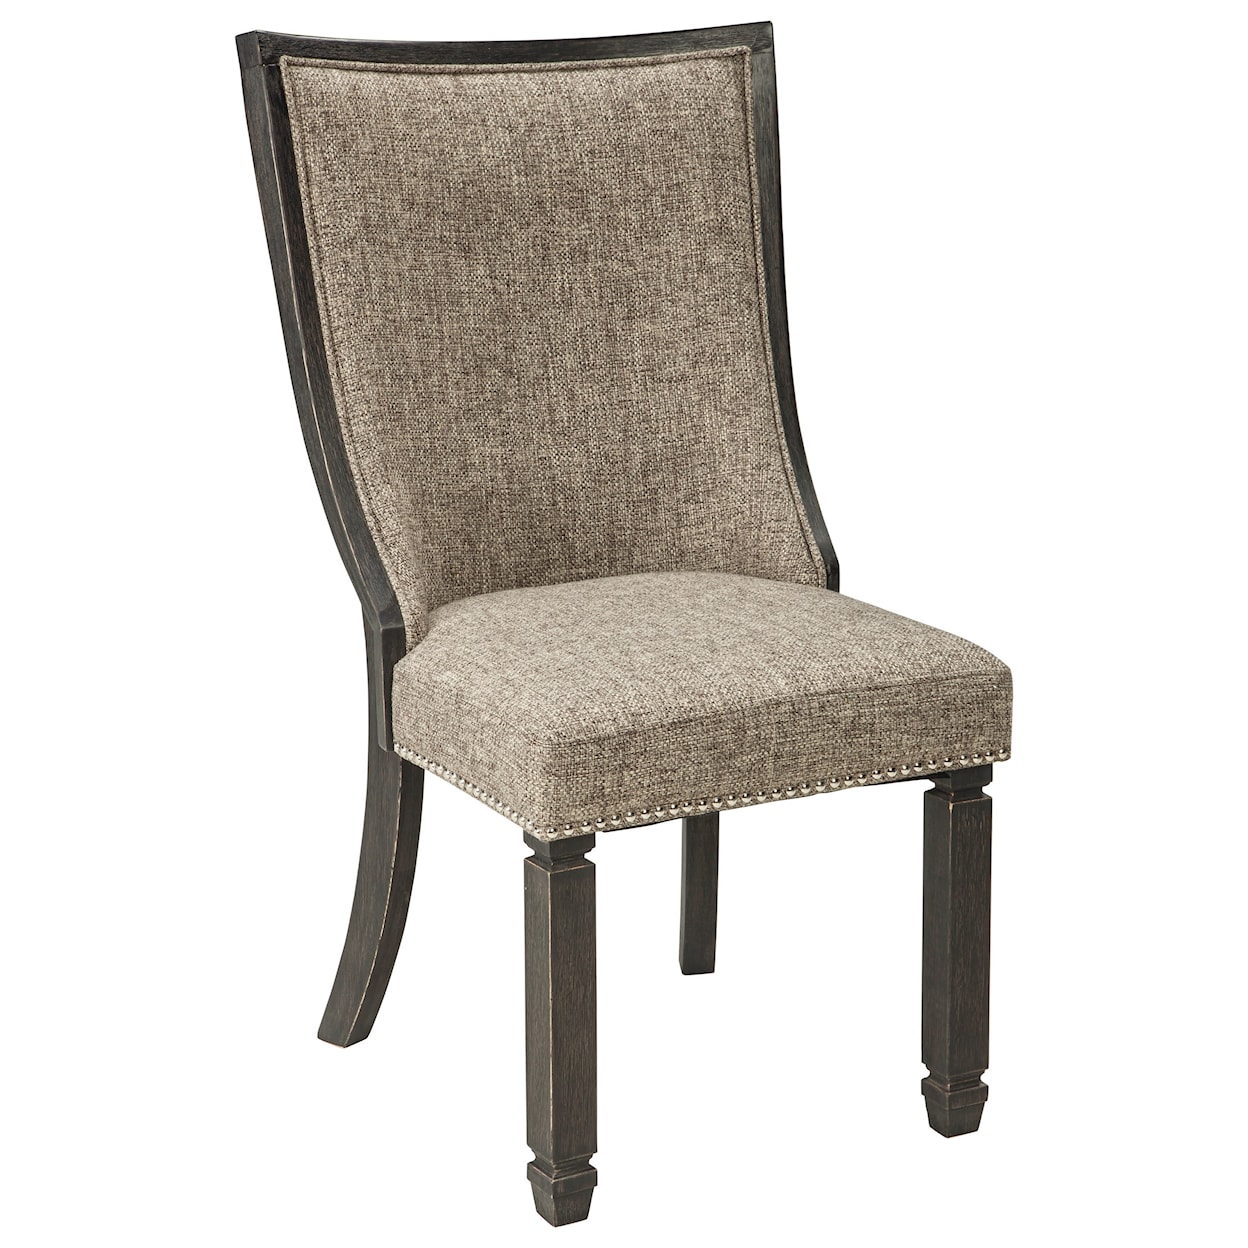 Signature Design by Ashley Furniture Tyler Creek Upholstered Side Chair